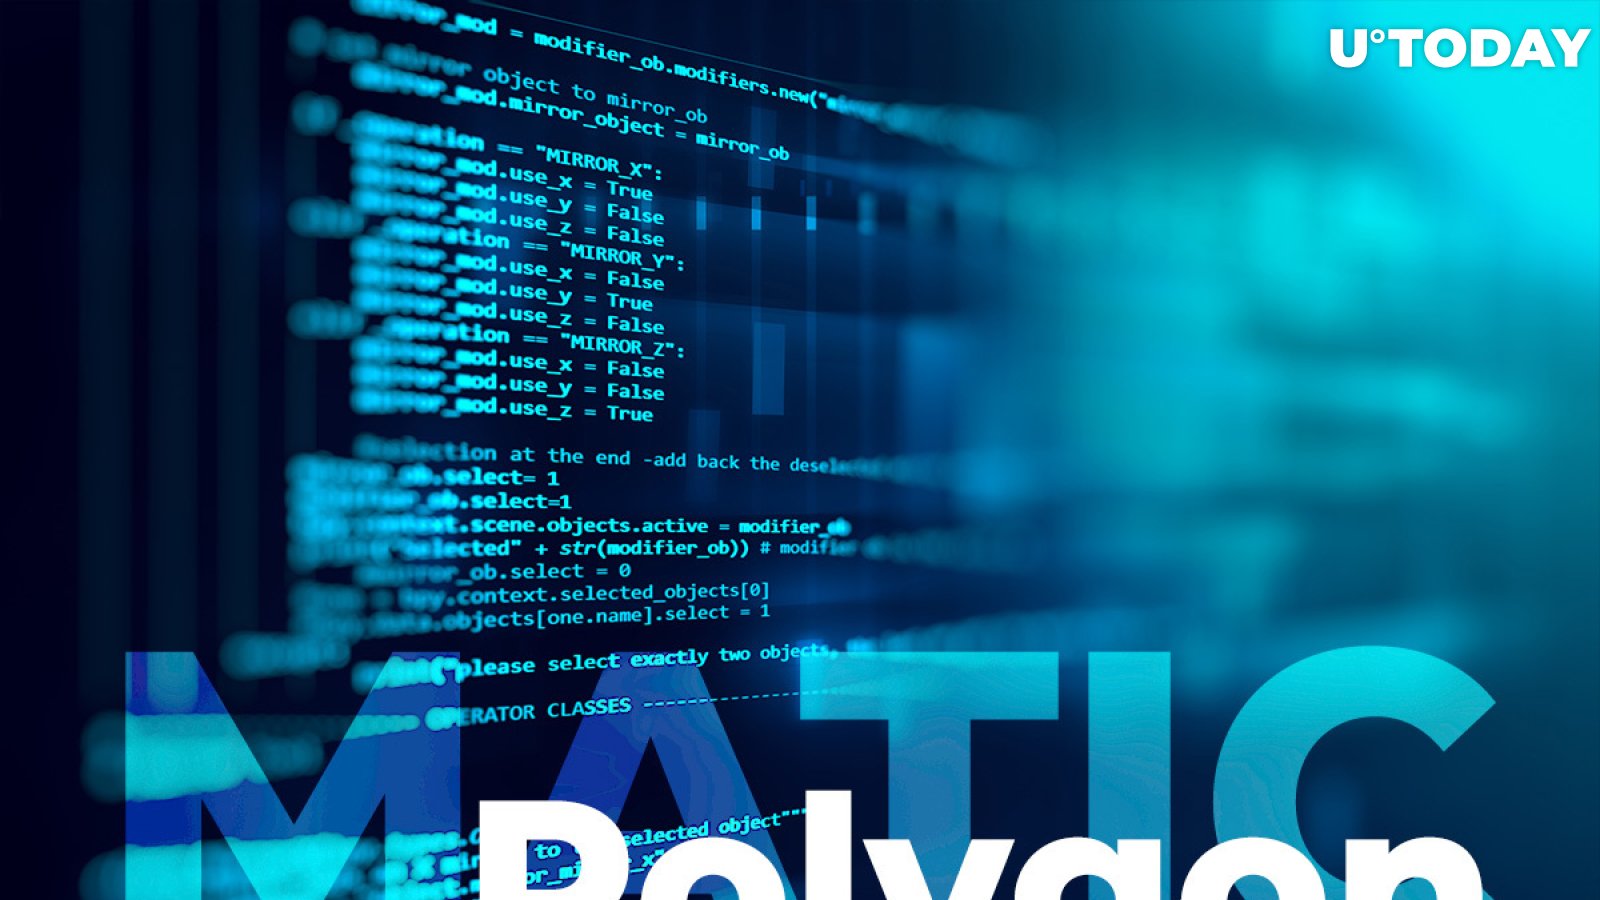 Polygon (MATIC) to Host First-Ever Valuecoin by MahaDAO